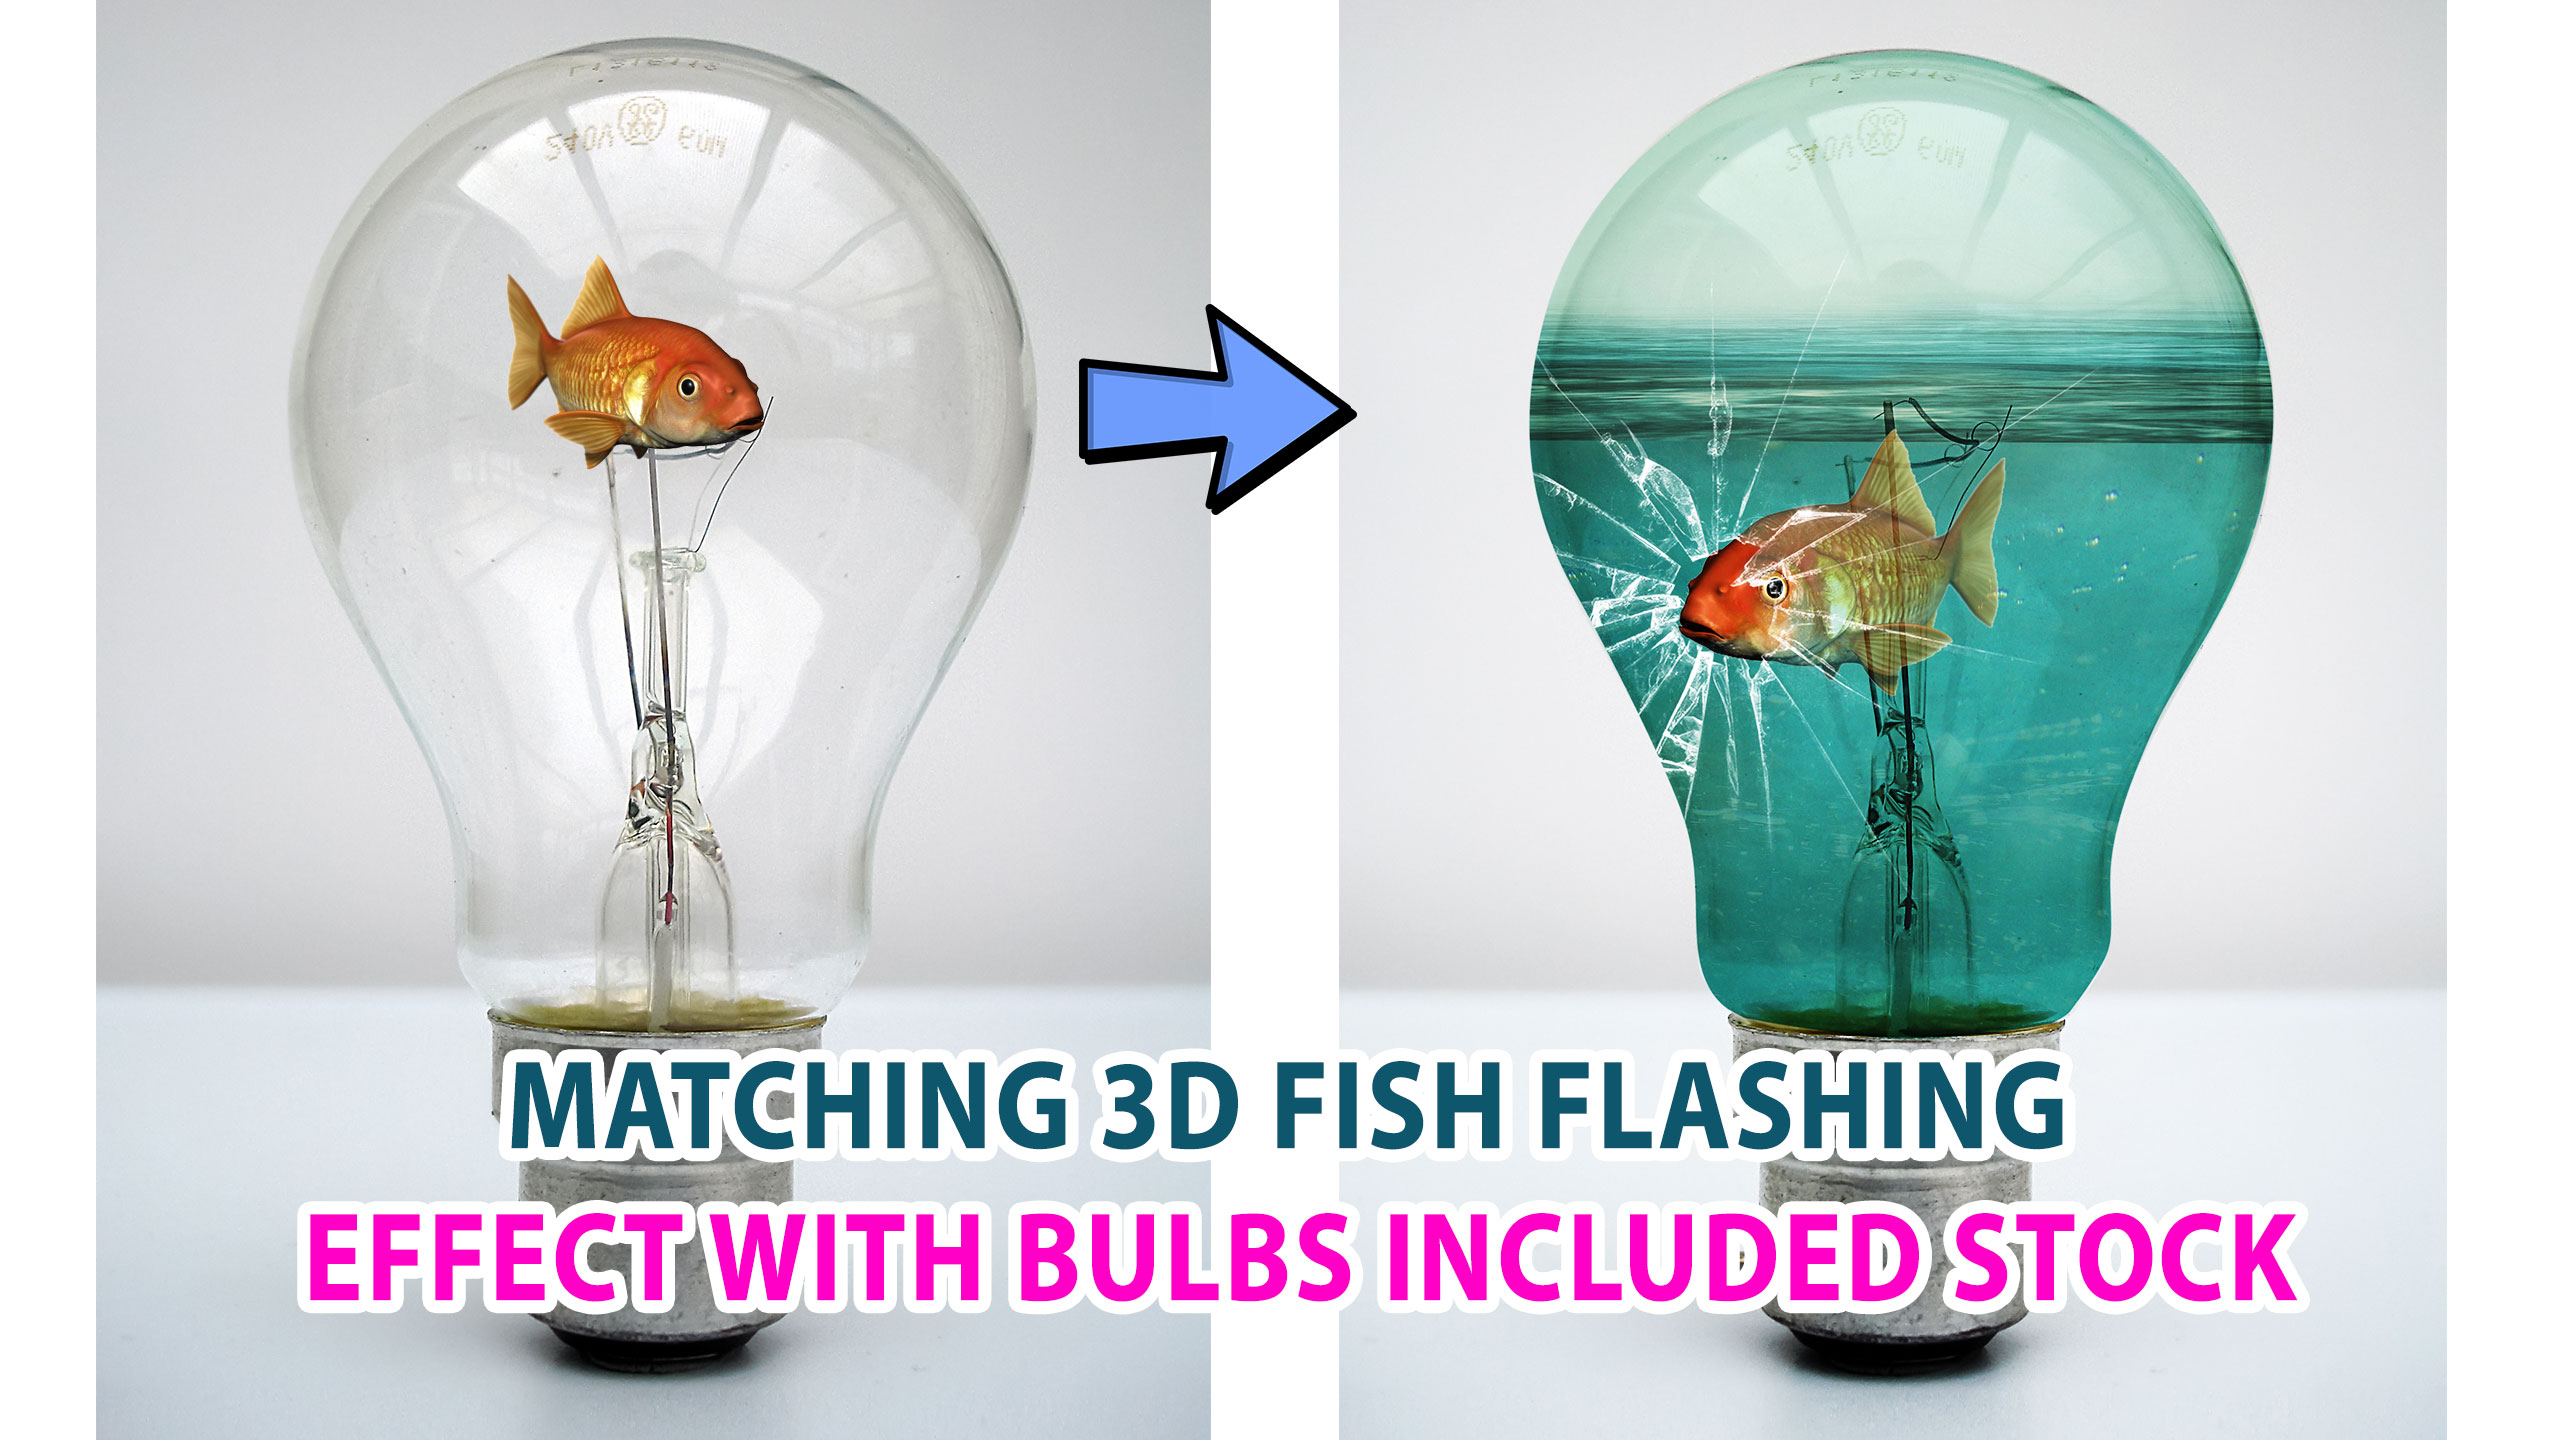 Matching 3D Fish Flashing Effect with Bulbs Included Stock